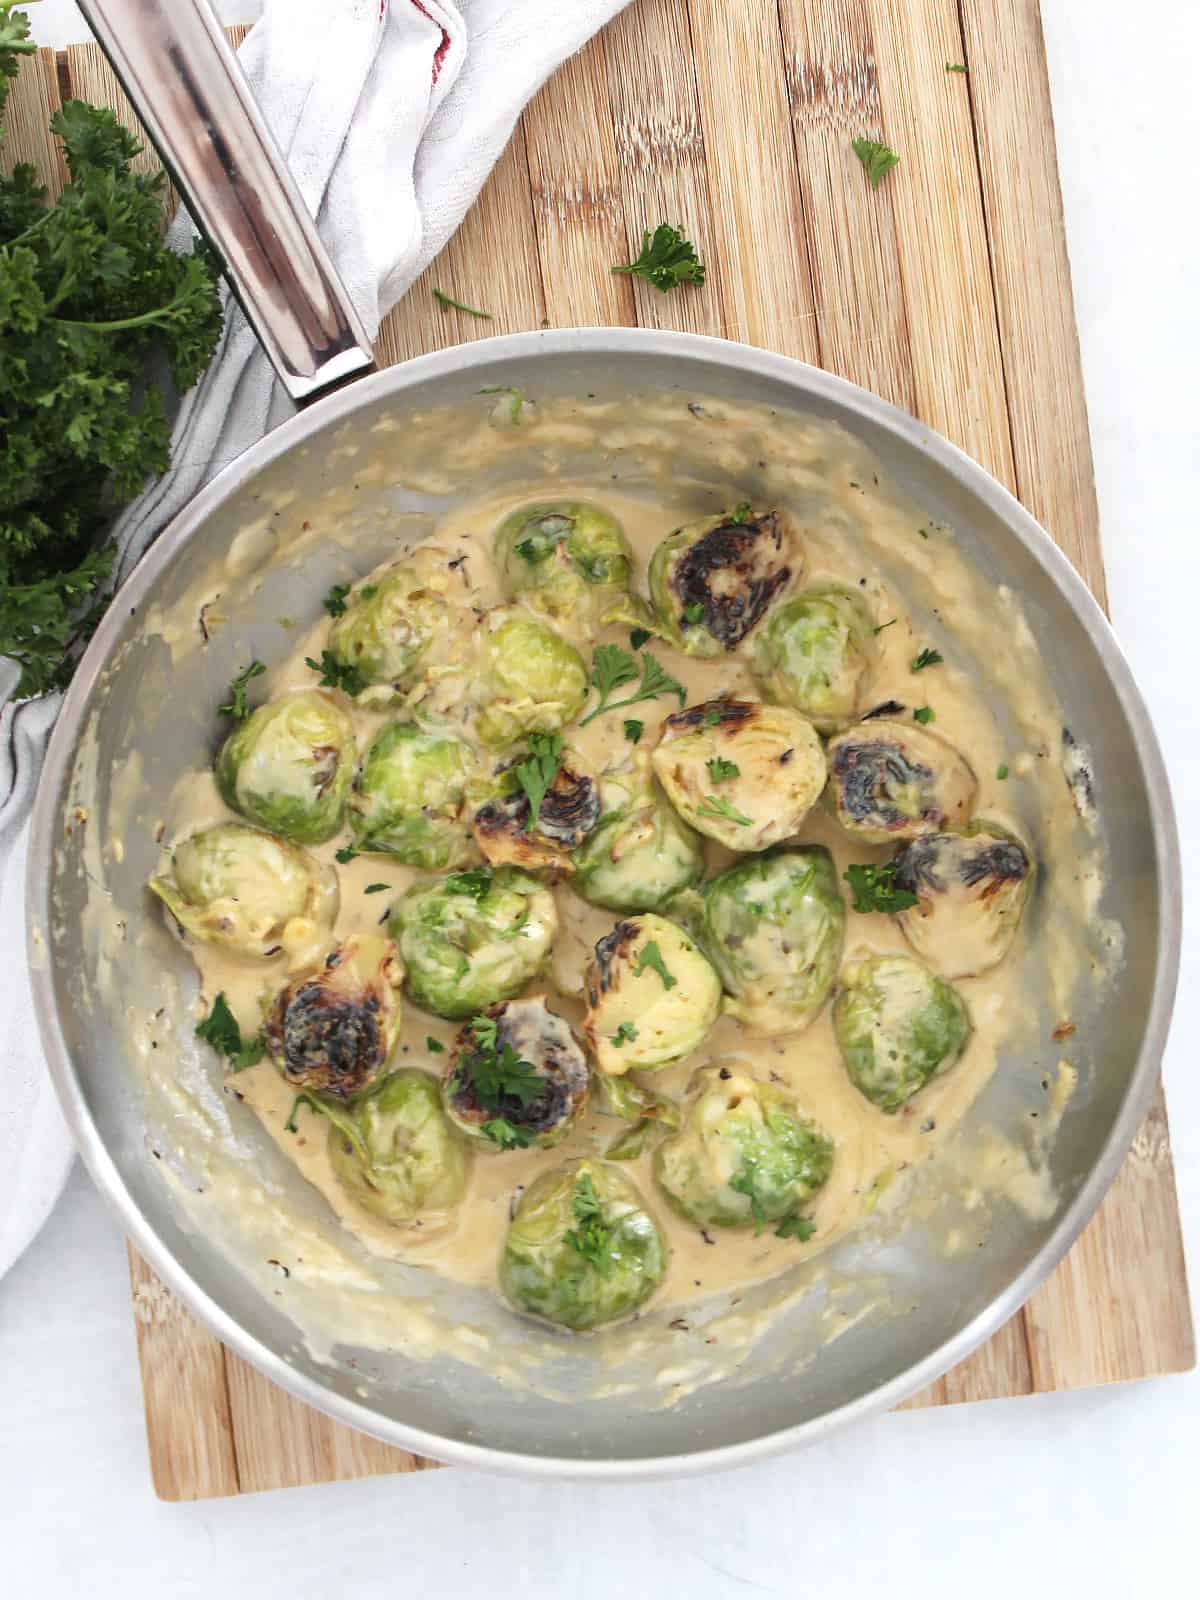 Creamed Brussels sprouts in a skillet on a wooden chopping board.